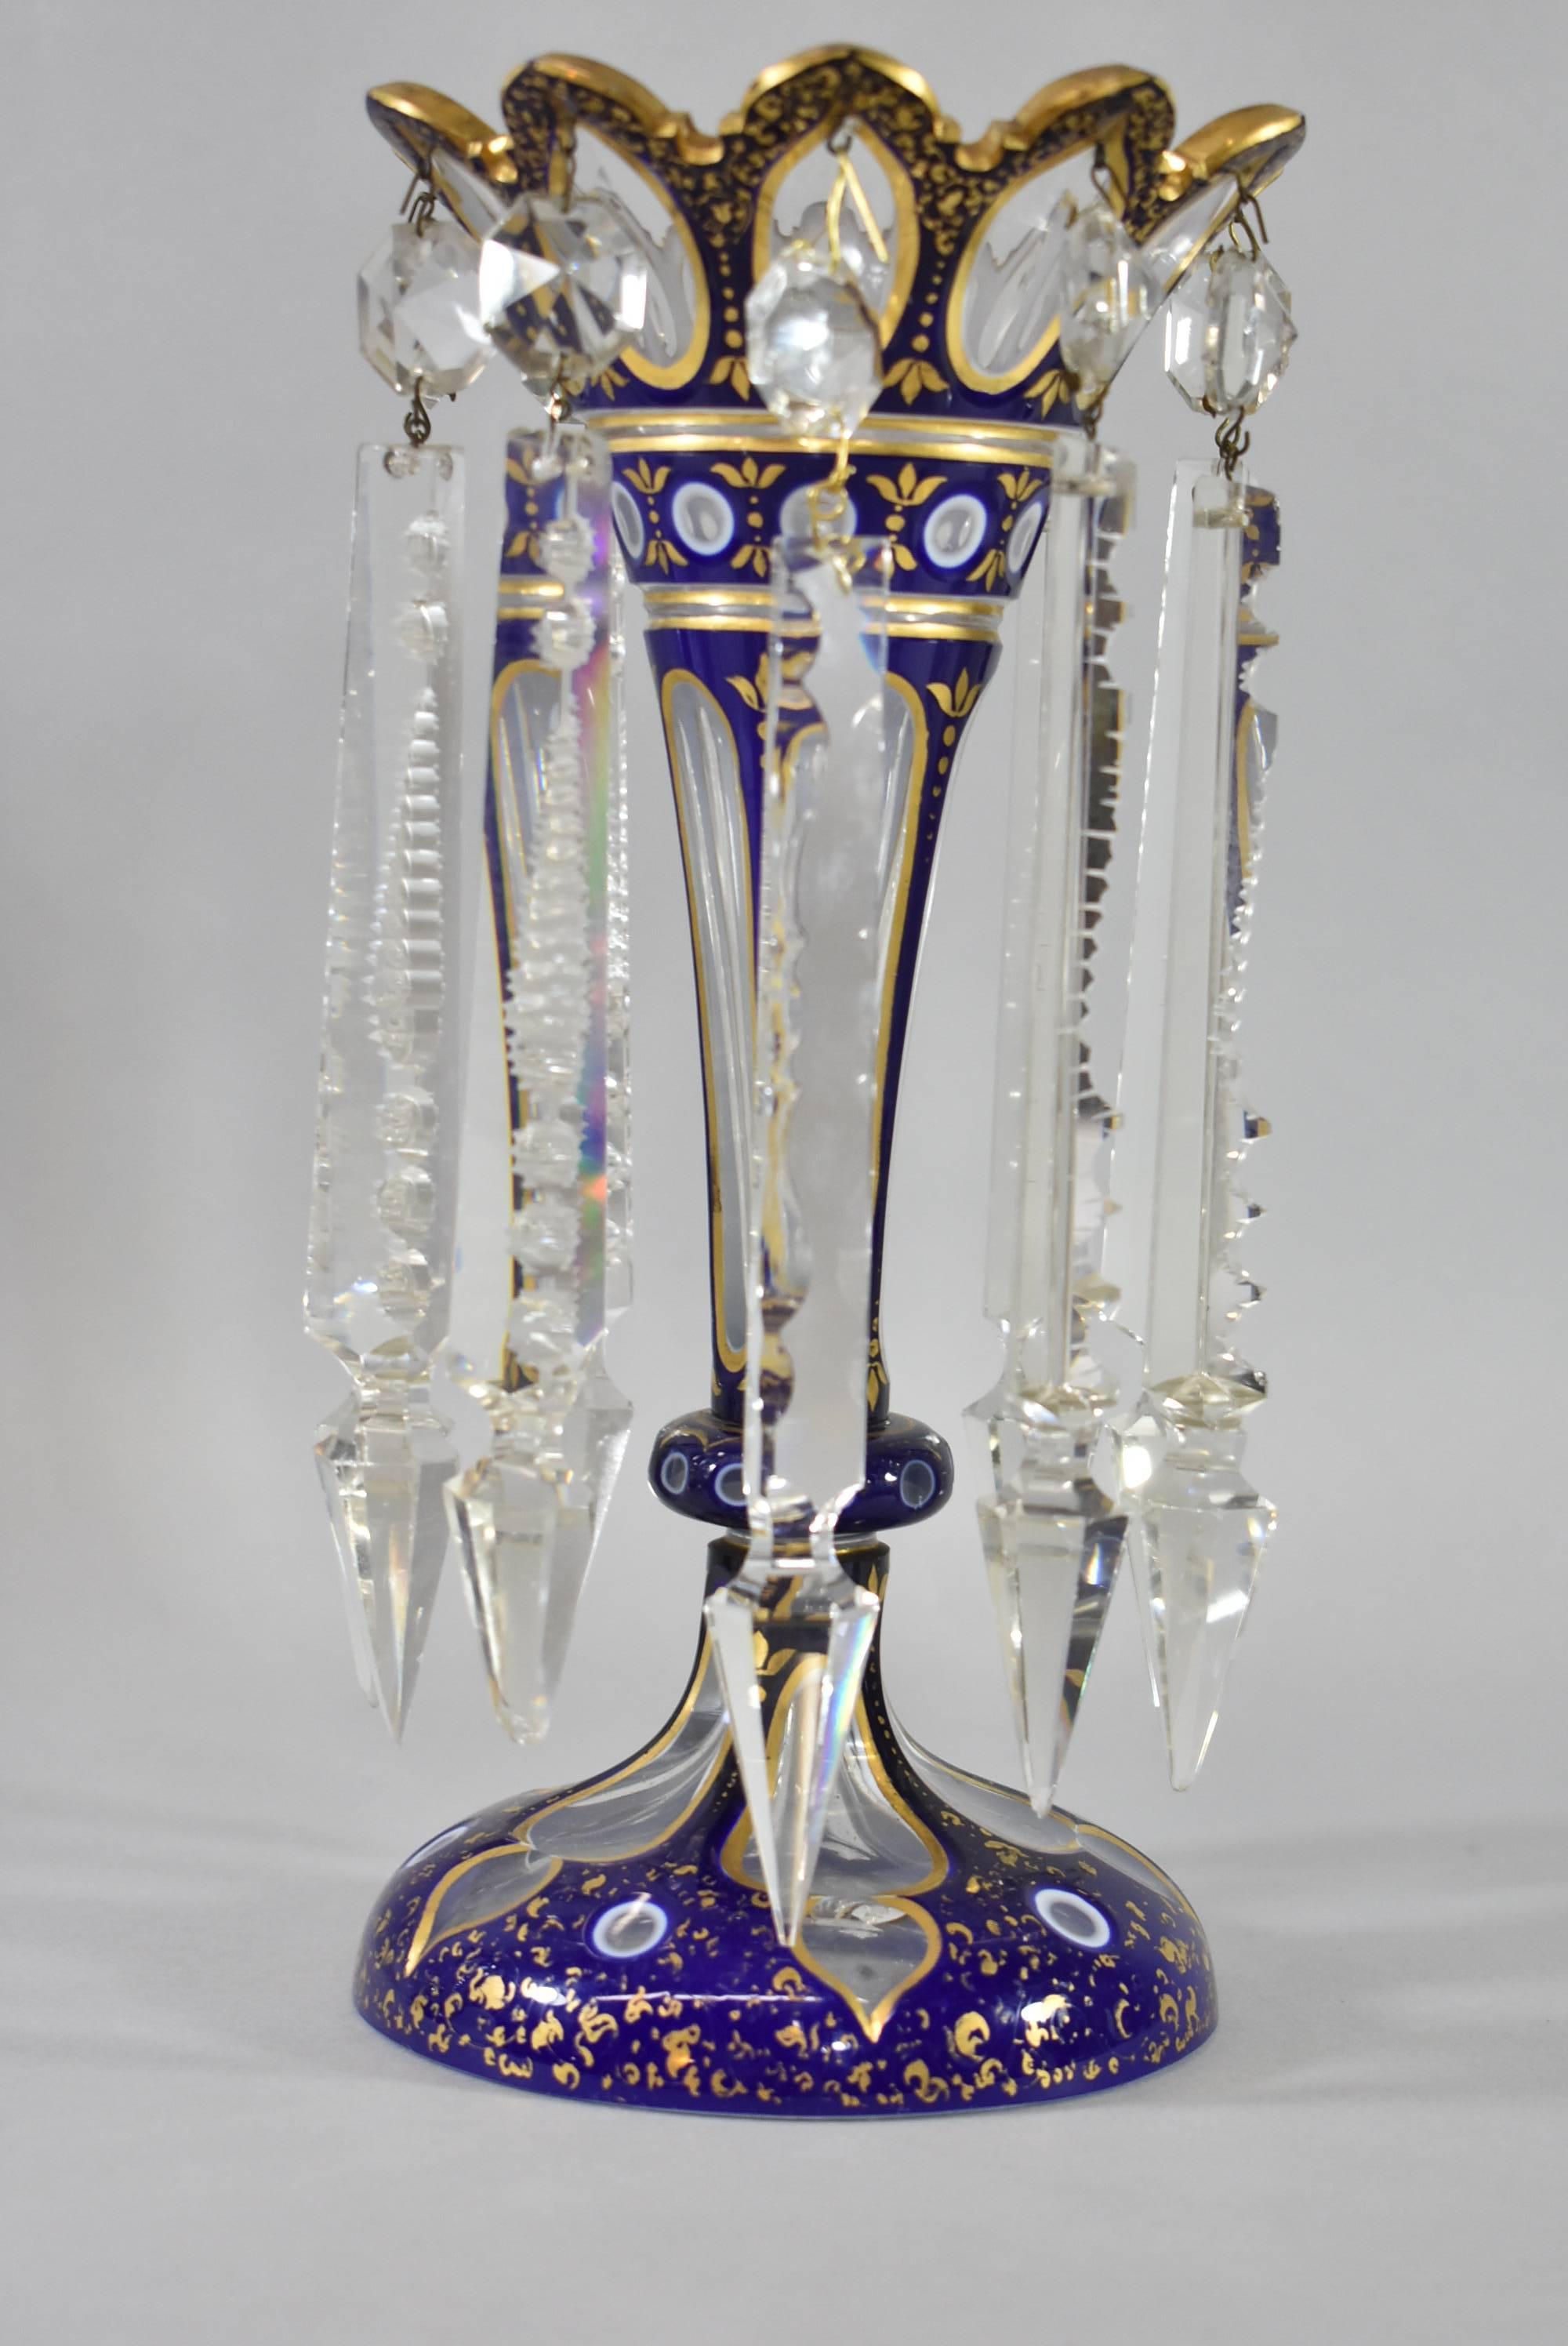 A stunning pair of Moser Bohemian style Lustre Vases. Hand-painted cobalt blue with gold and white trim and crystal prisms. The dimensions are 10